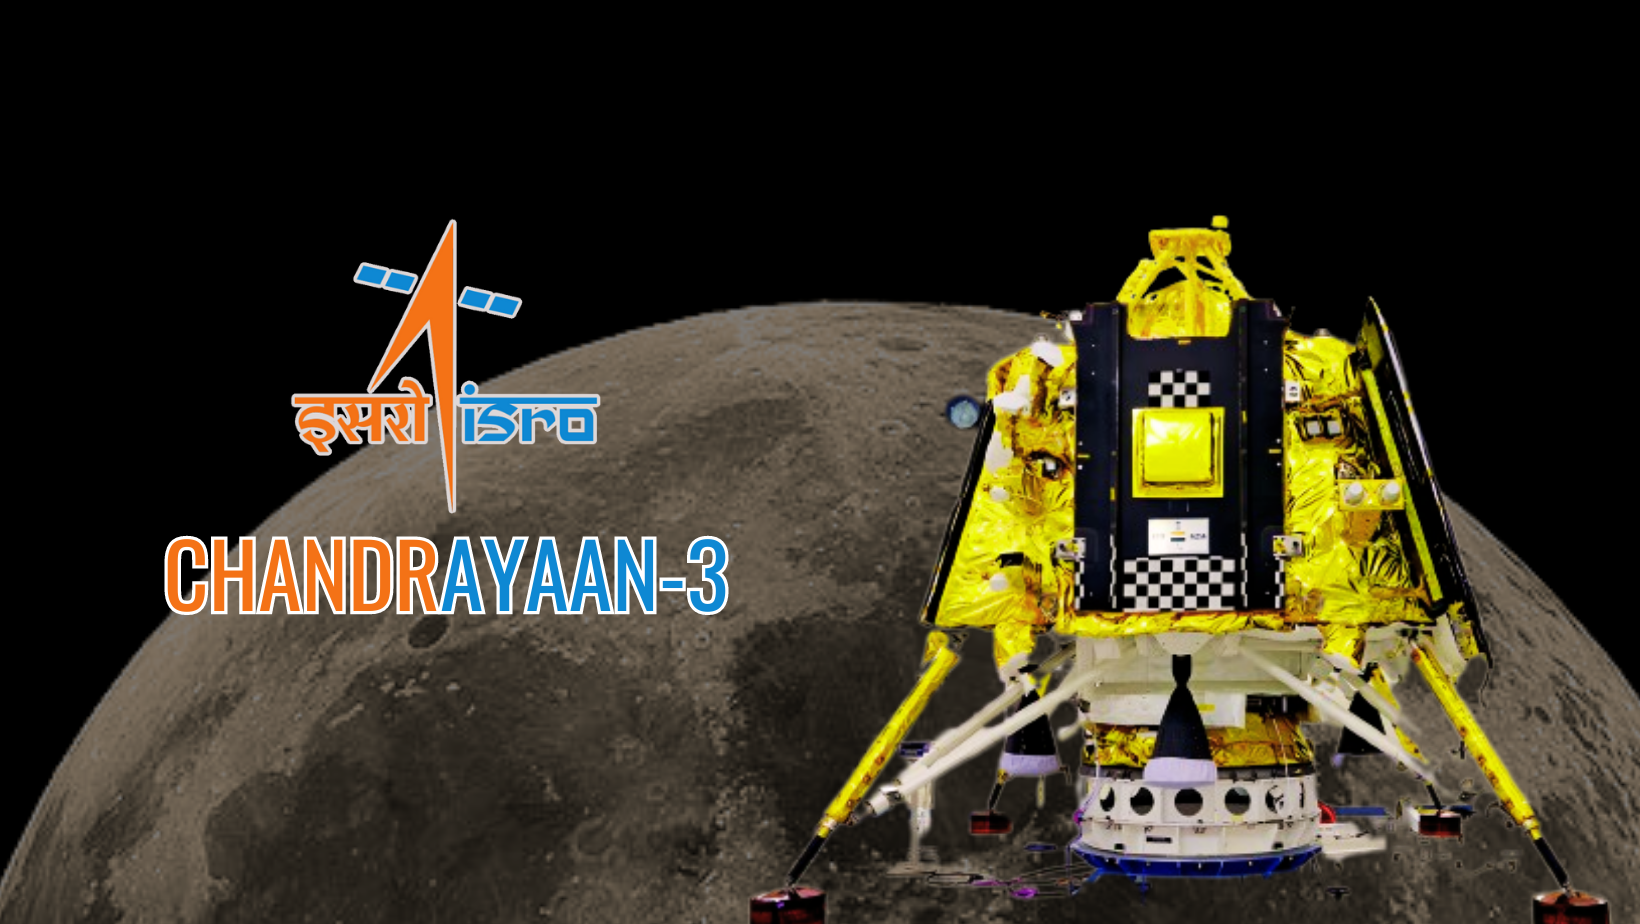 5 lessons for startups from Chandrayaan 3's victory